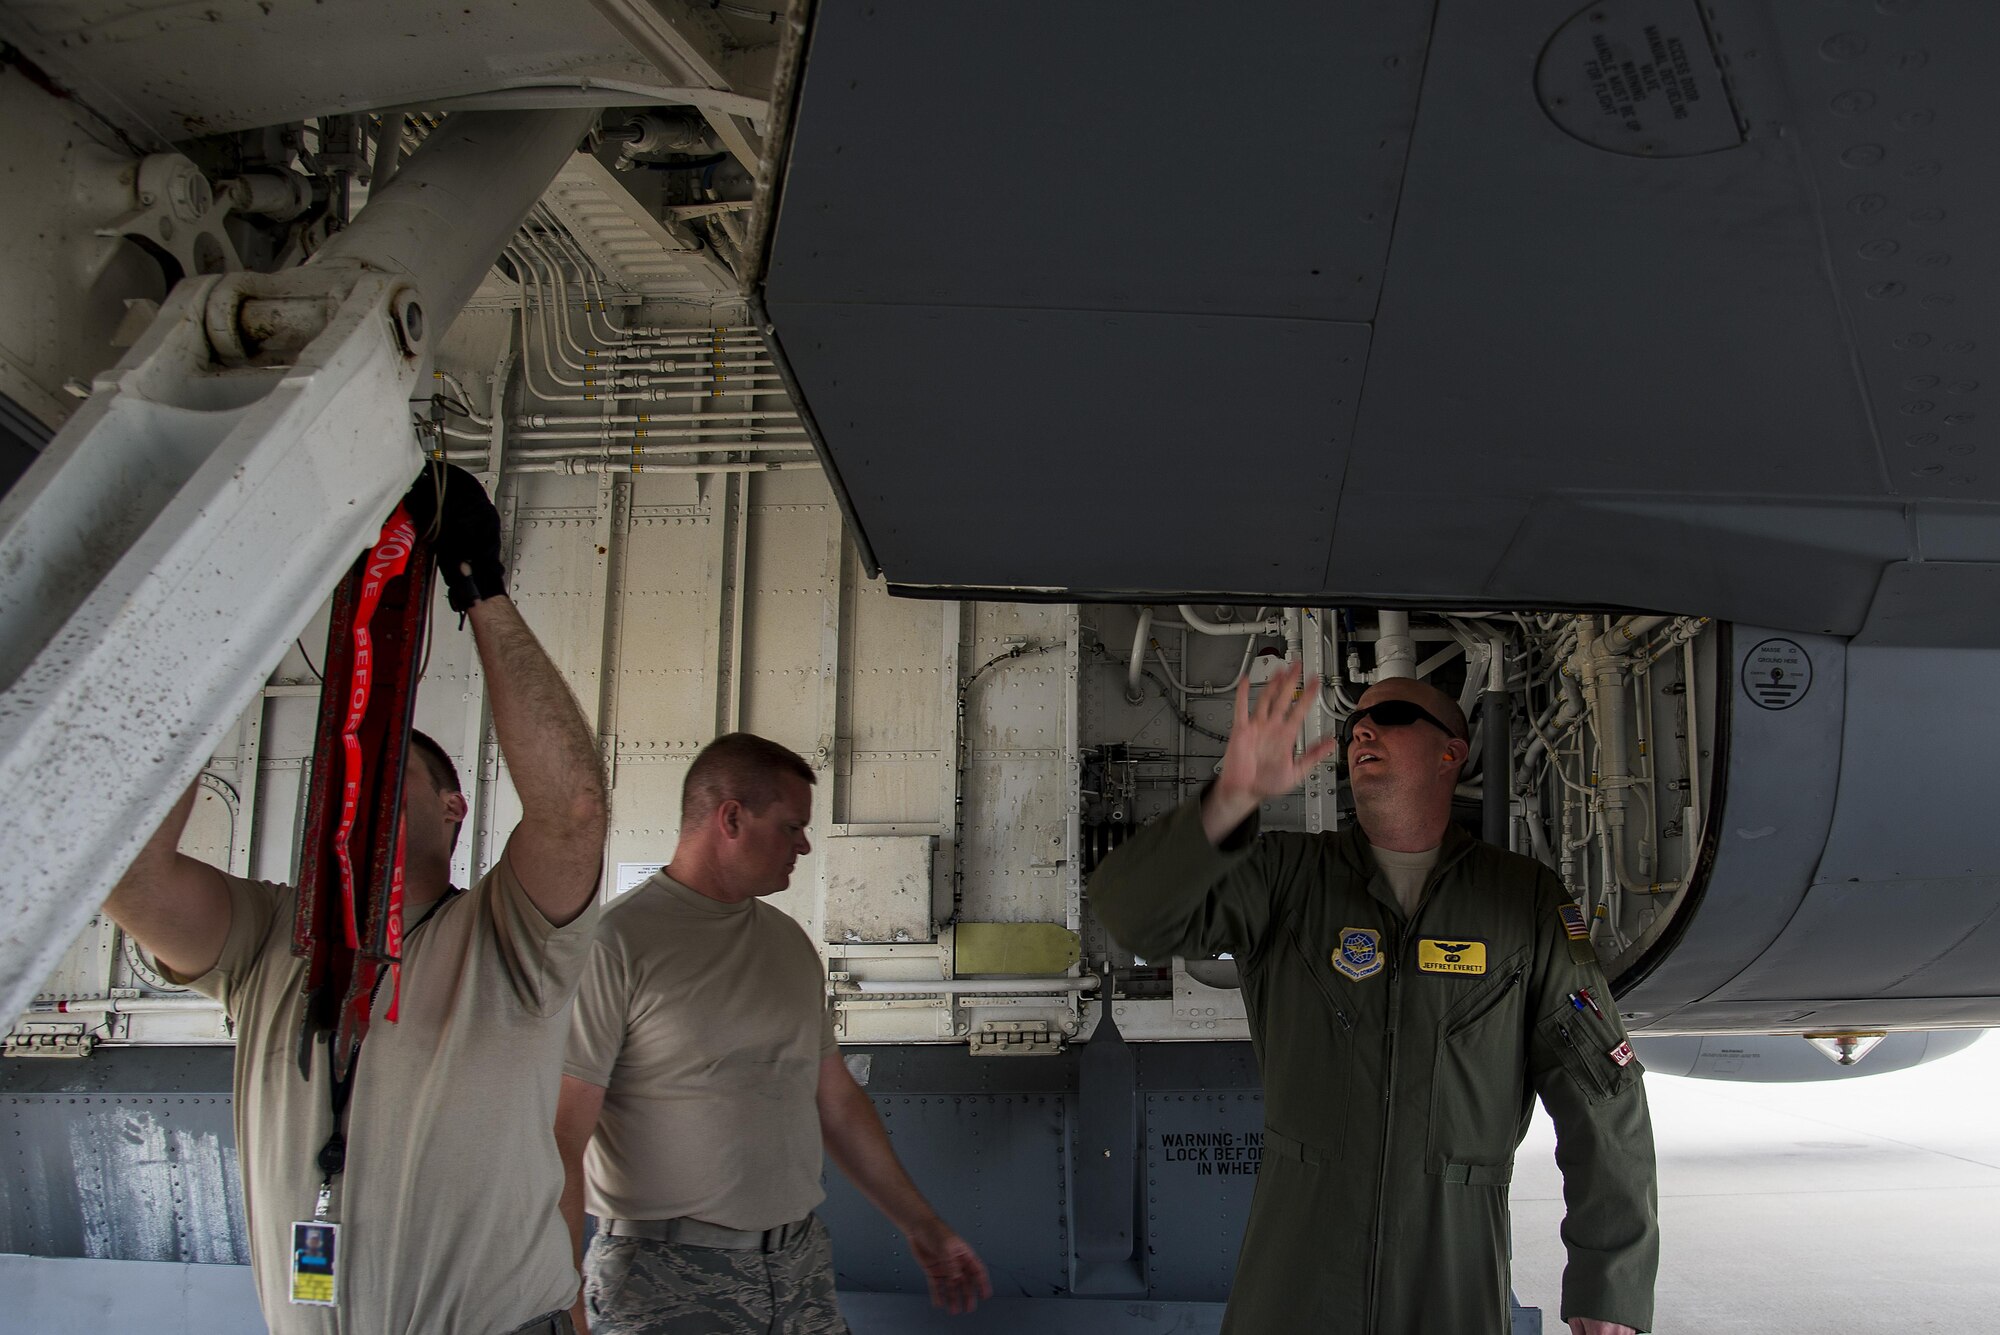 Captain Jeffrey Everett, 906th Air Refueling Squadron pilot, completes his preflight inspection prior to an air refueling mission June 3, 2016 at Scott Air Force Base, Illinois. The mission was a training sortie focusing on maintain aircrew readiness in conjunction with the 115th Fighter Wing of the Wisconsin Air National Guard. (U.S. Air Force Photo by Airman Daniel Garcia)